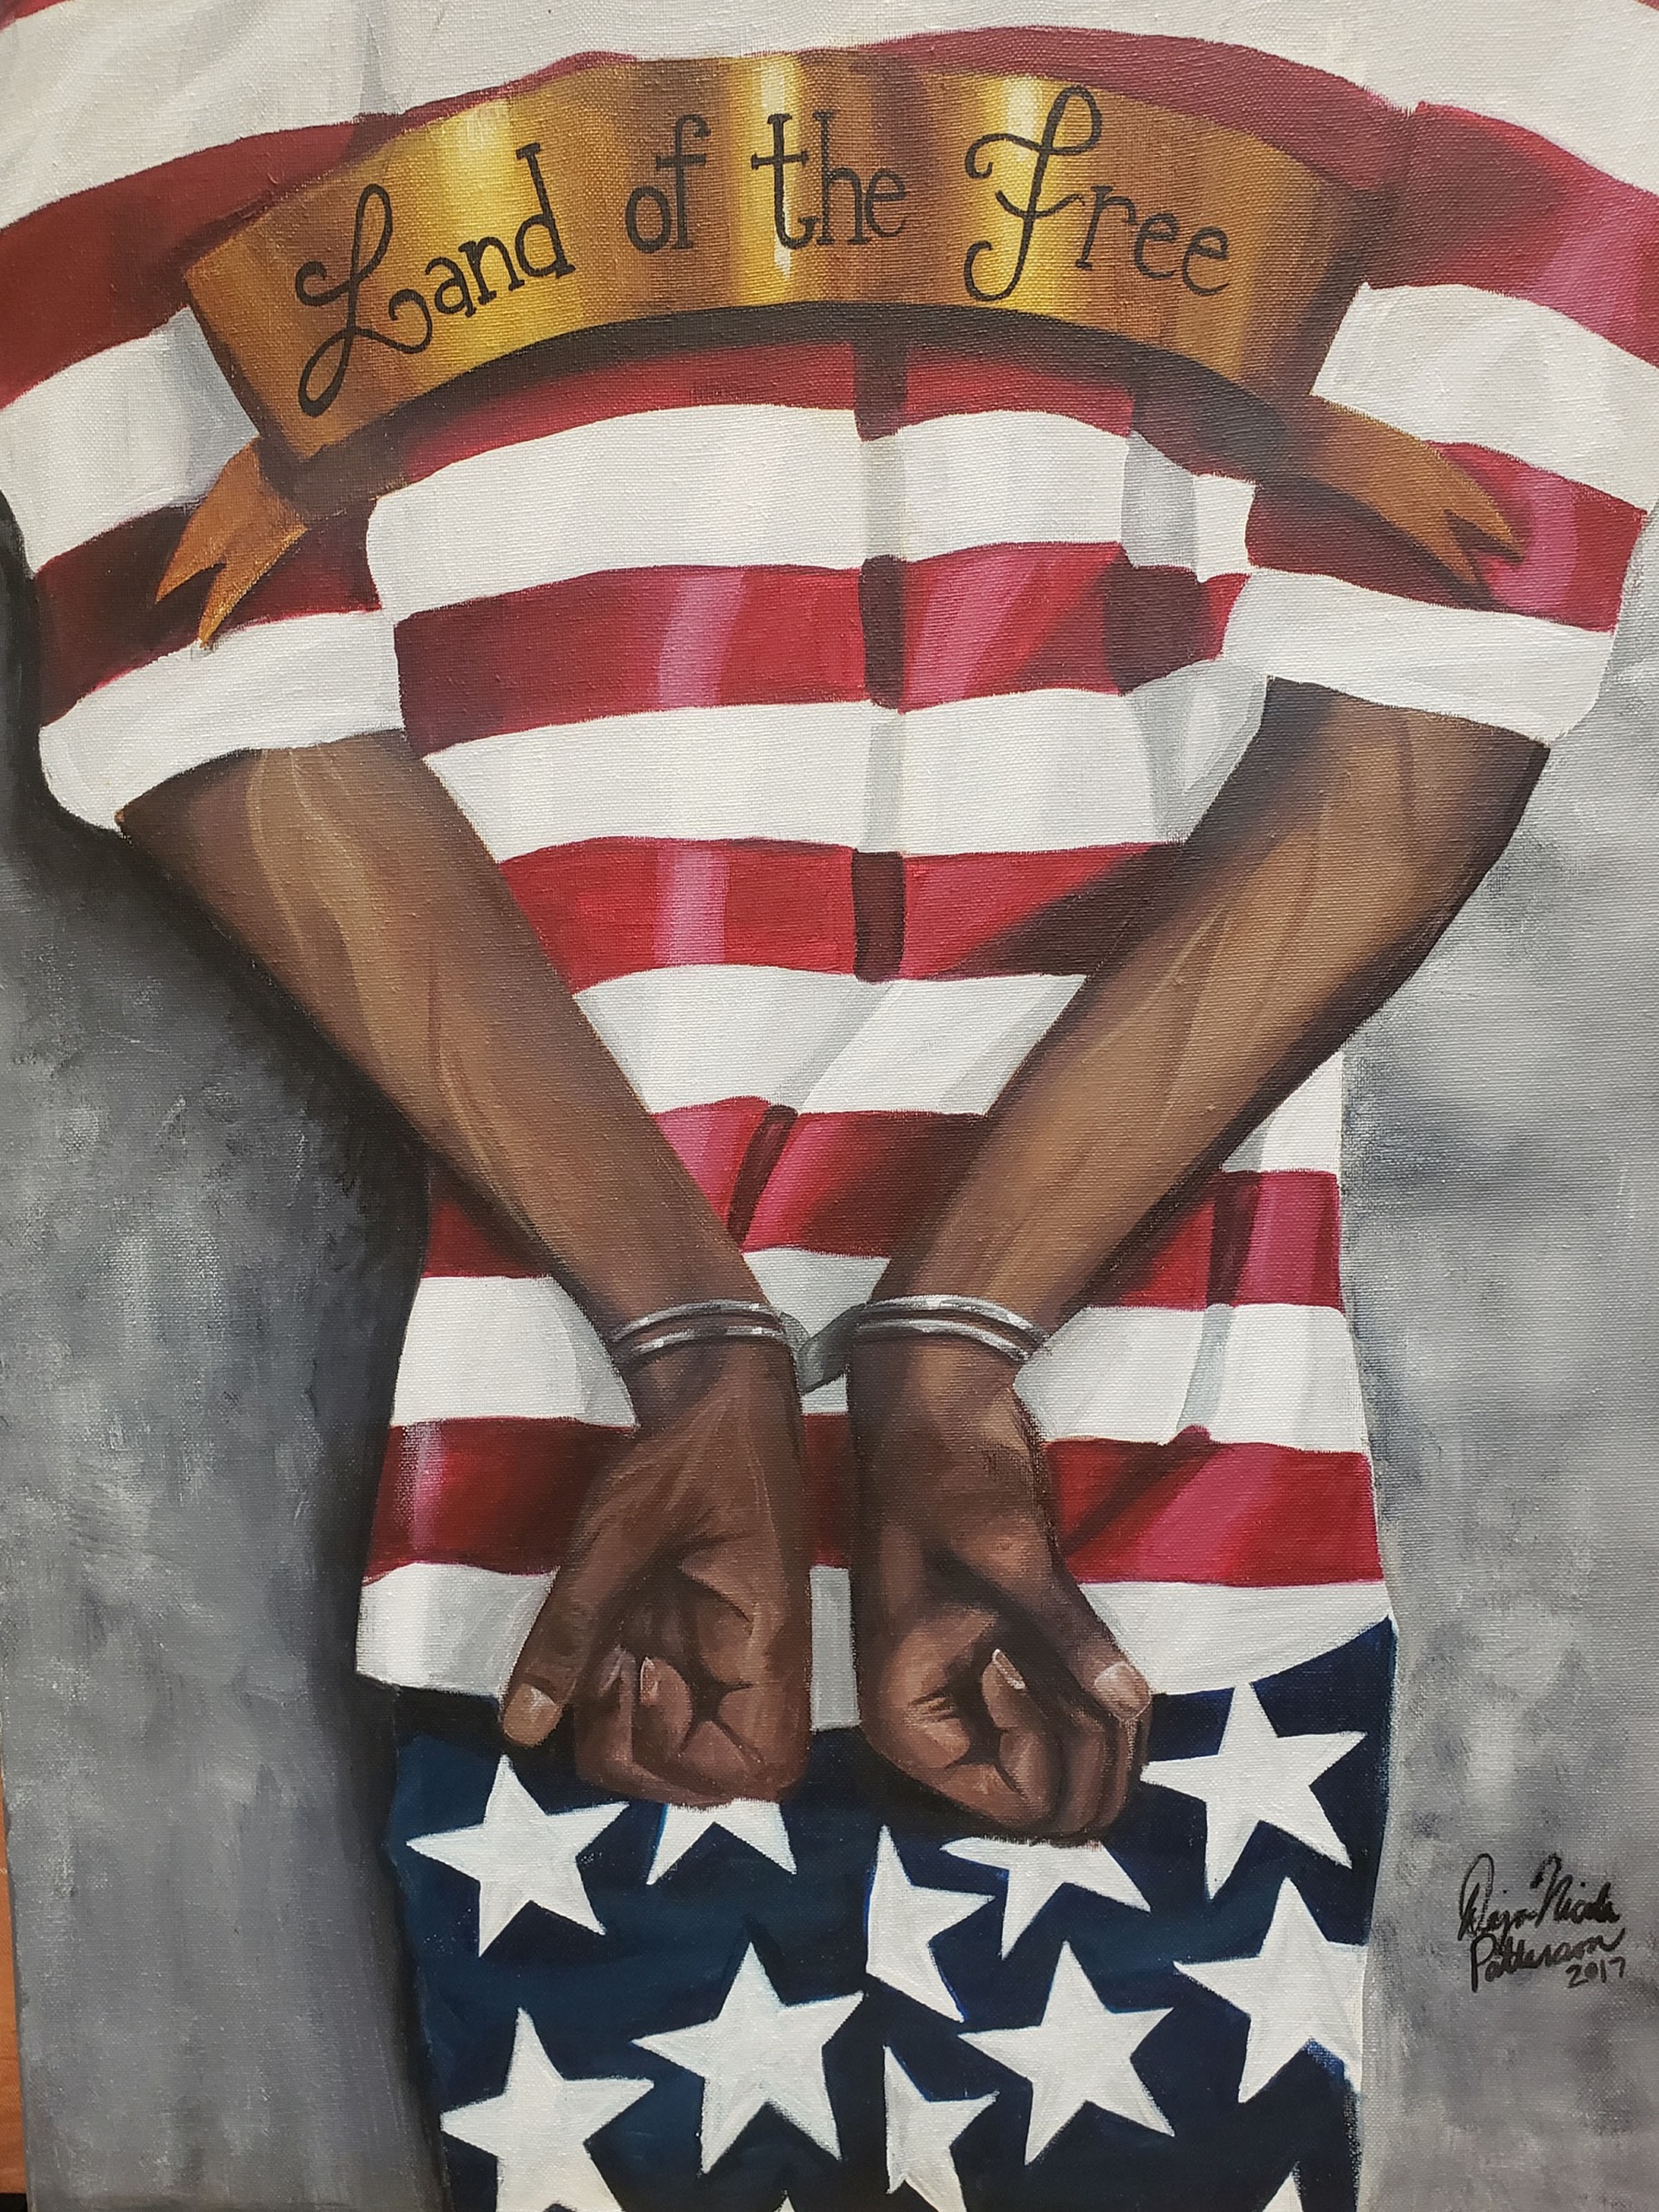 Painting of a handcuffed person from the back wearing a red and white striped shirt and pants with white stars on a blue background. A gold banner over the person's shoulders reads "Land of the Free."